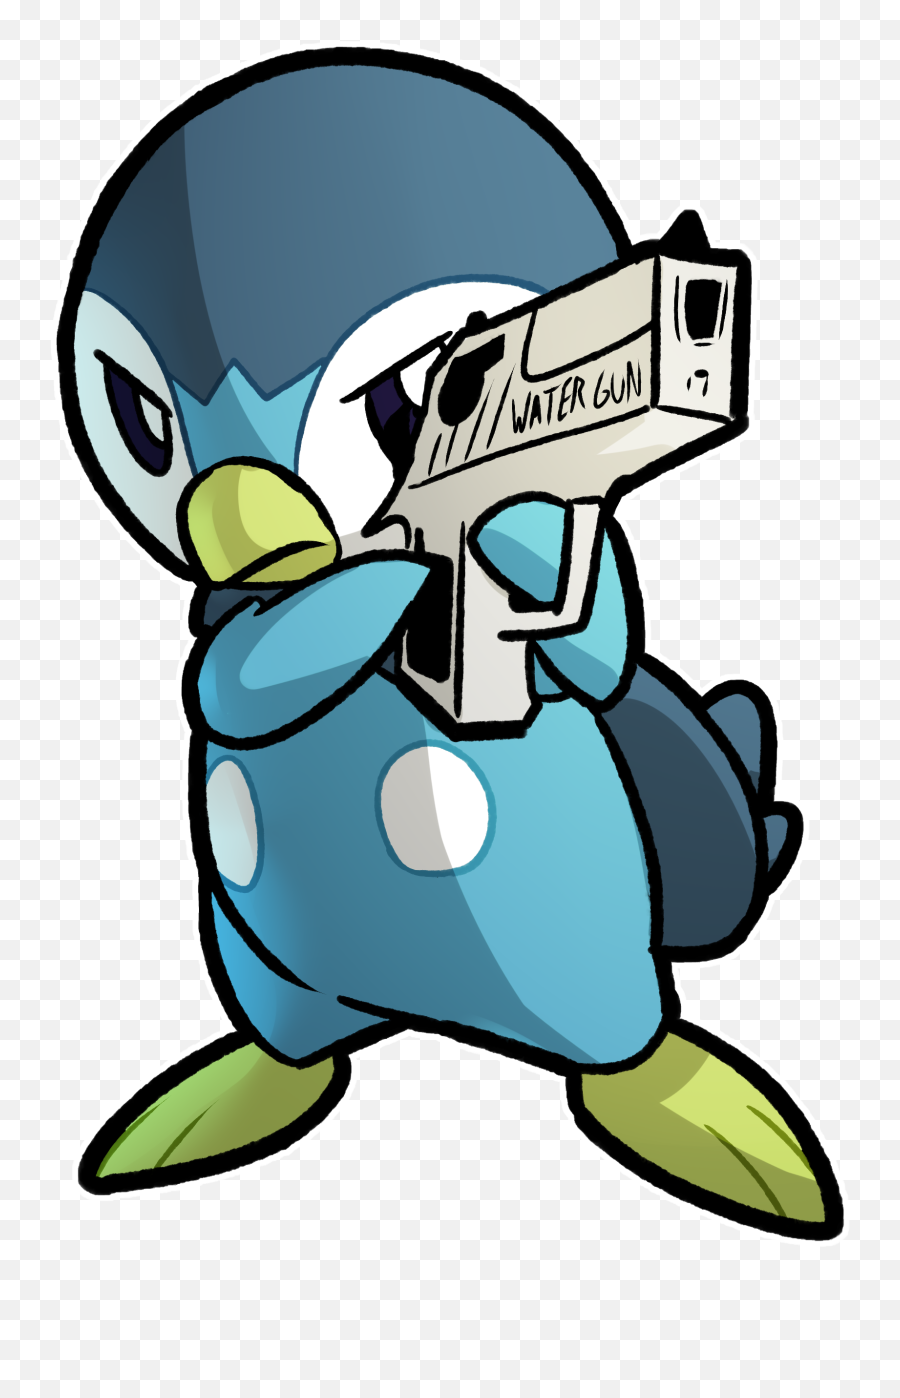 Piplup Using Water Gun If Op Will Not Have Any Plan To Delet Emoji,Pistol Finger Emoticon